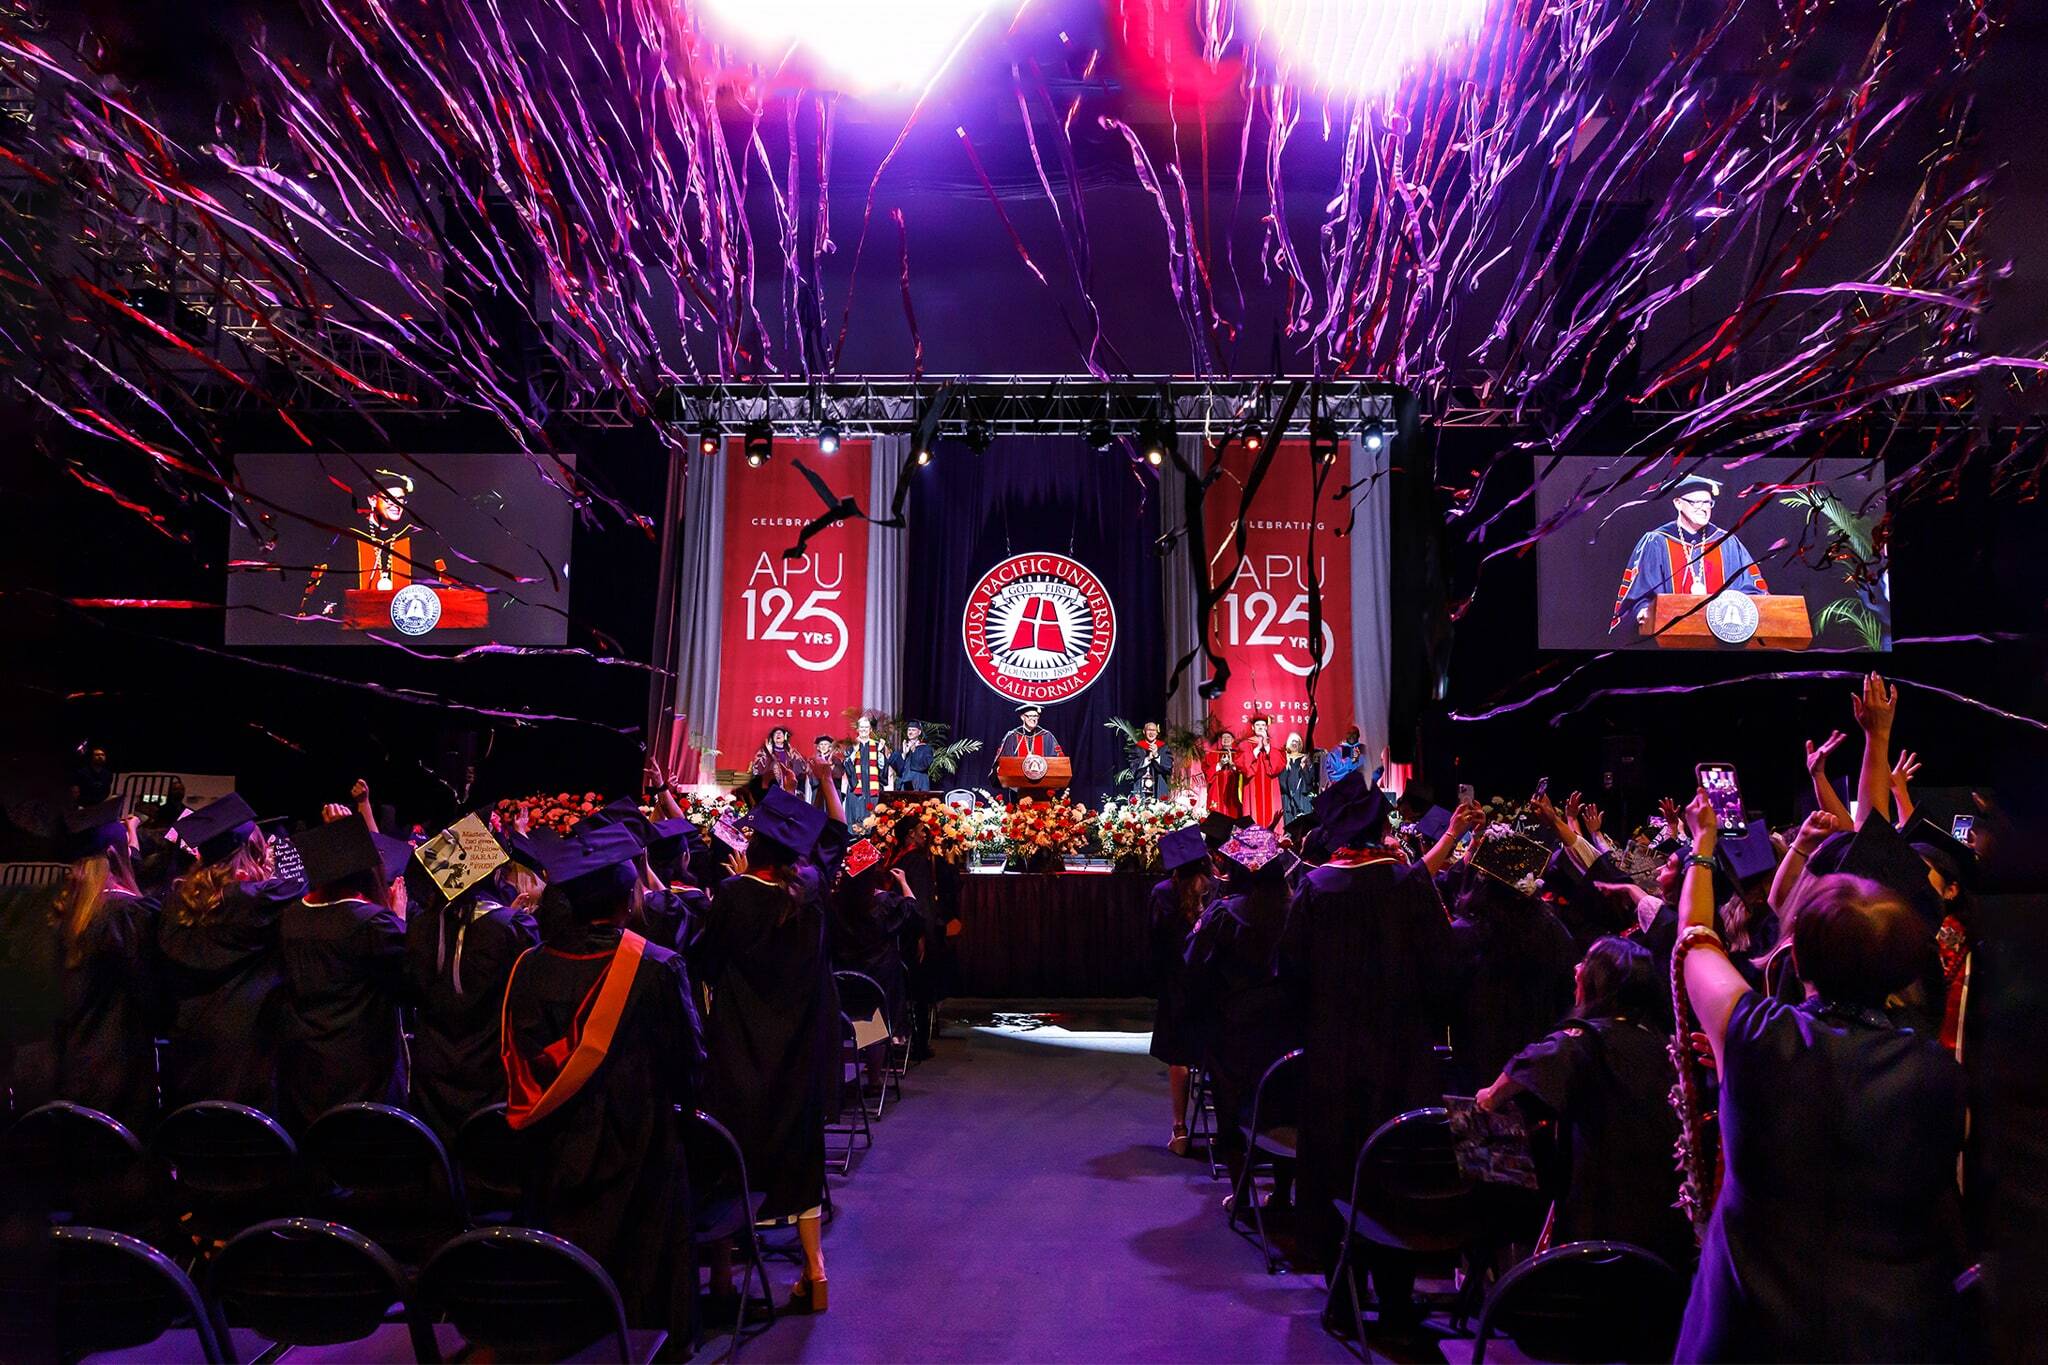 apu's president speaking during commencement ceremony